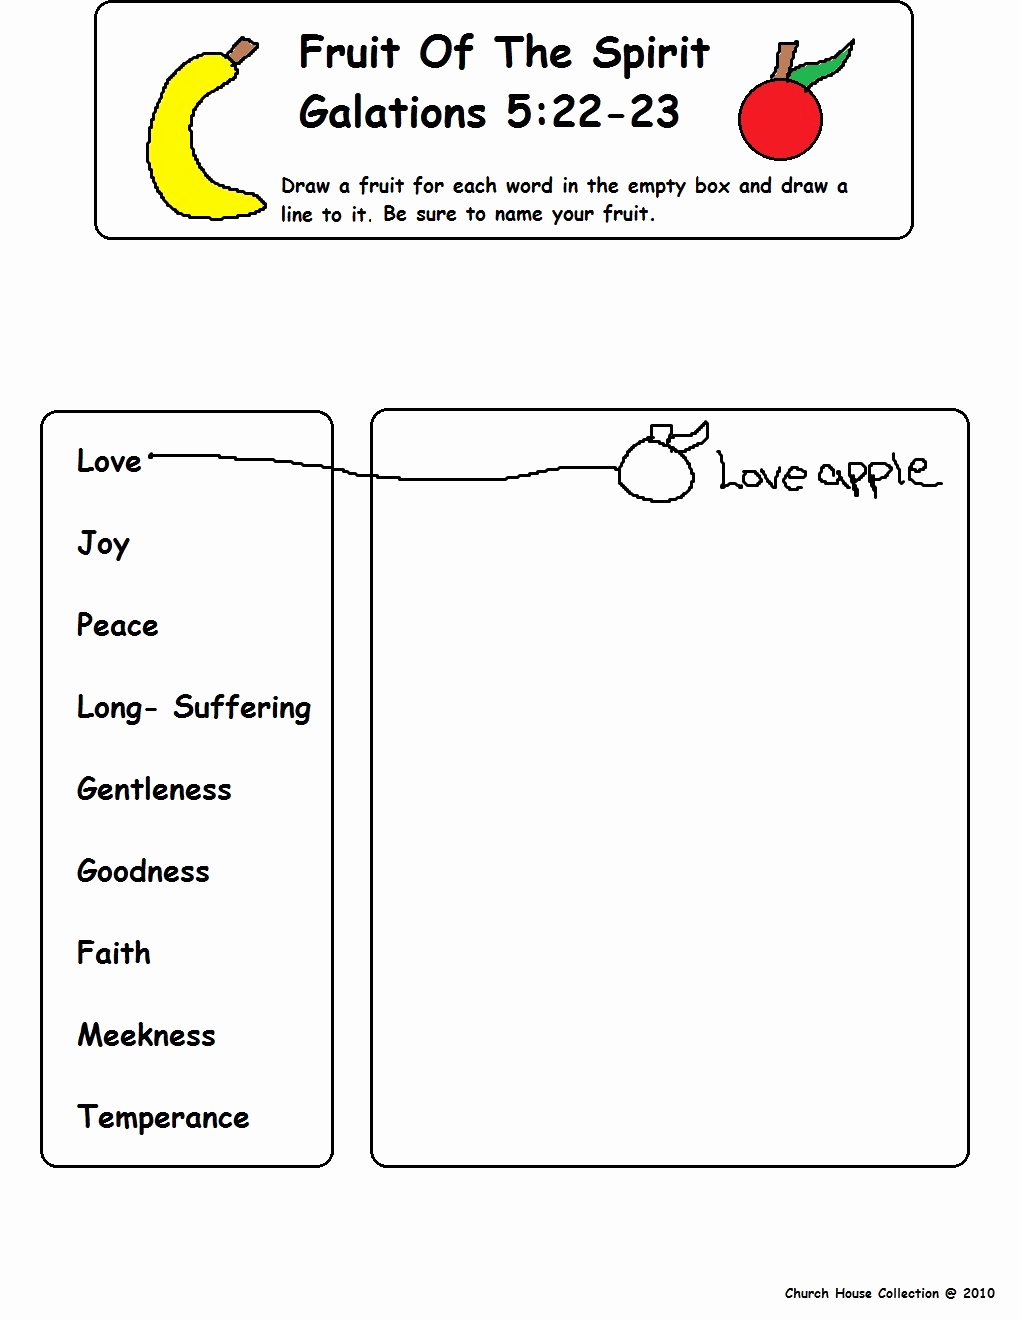 Fruits Of the Spirit Worksheets Best Of Fruit Of the Spirit Sunday School Lesson